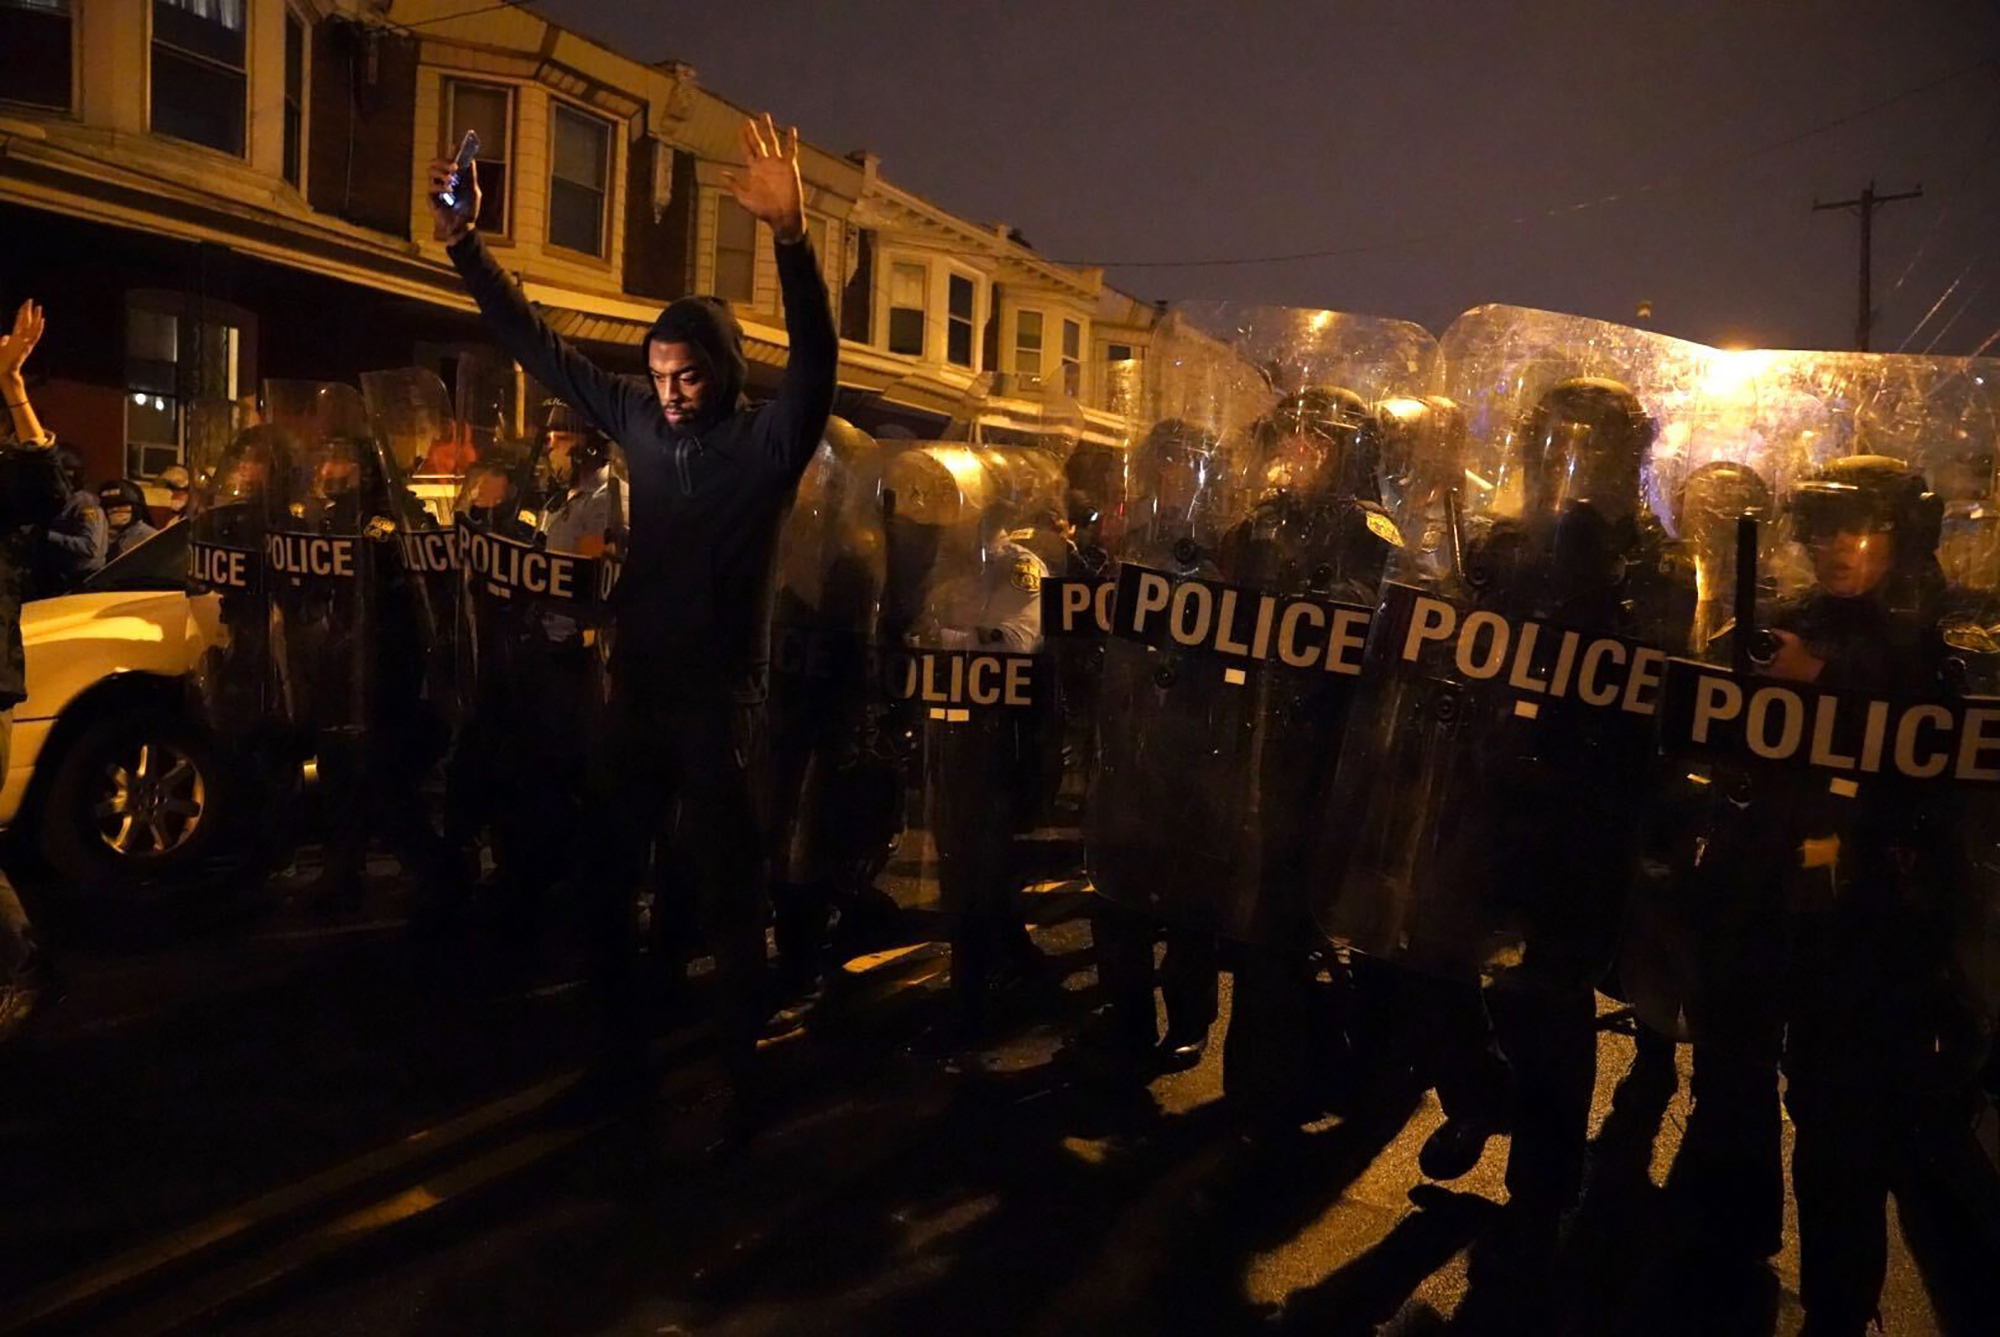 PHOTO: Sharif Proctor lifts his hands up in front of the police line during a protest in response to the police shooting of Walter Wallace Jr., Oct. 26, 2020, in Philadelphia.